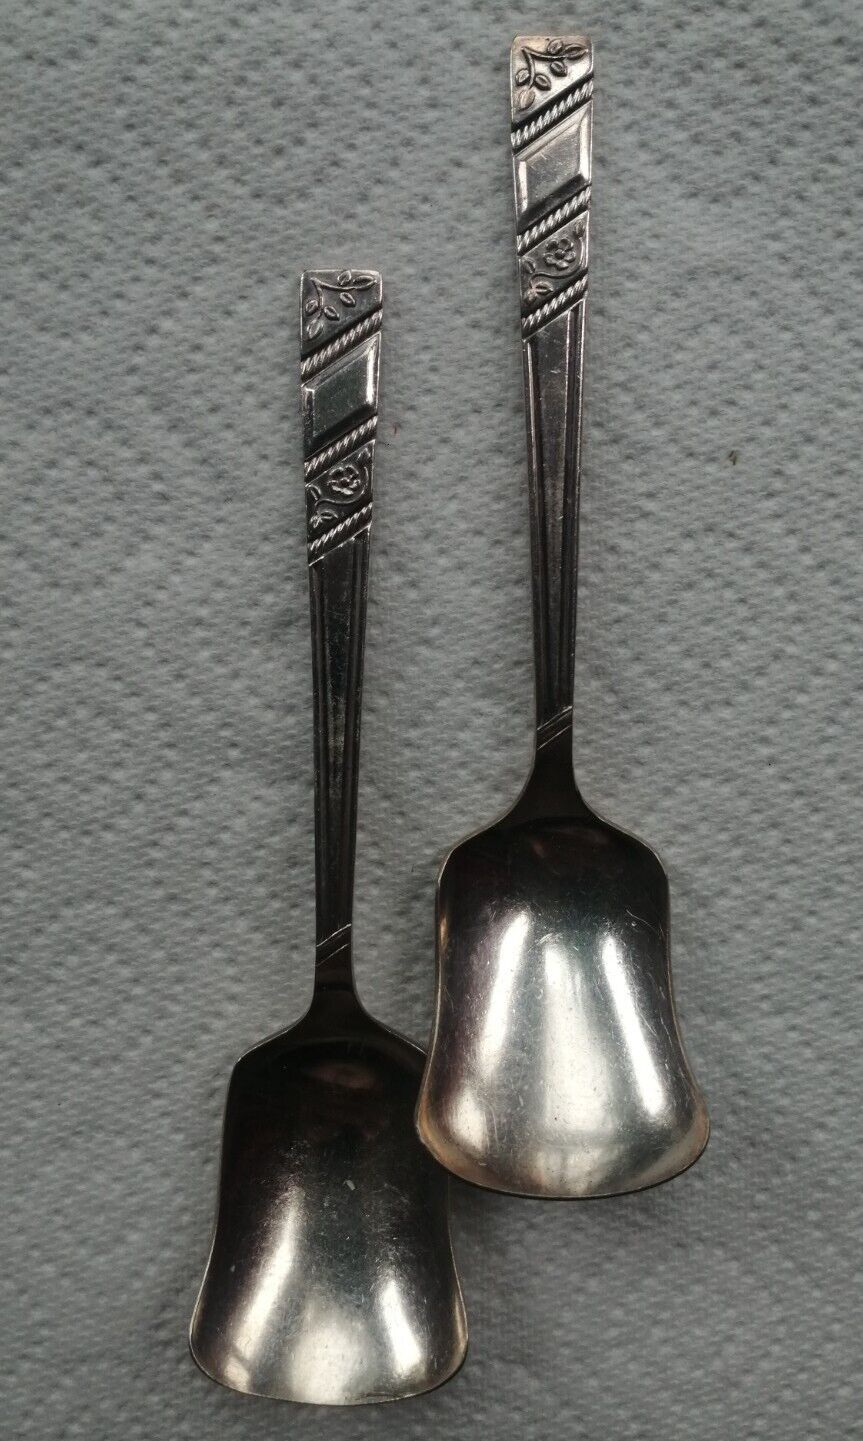 2 x V Ltd. Large Viners Square Caddy type Spoons